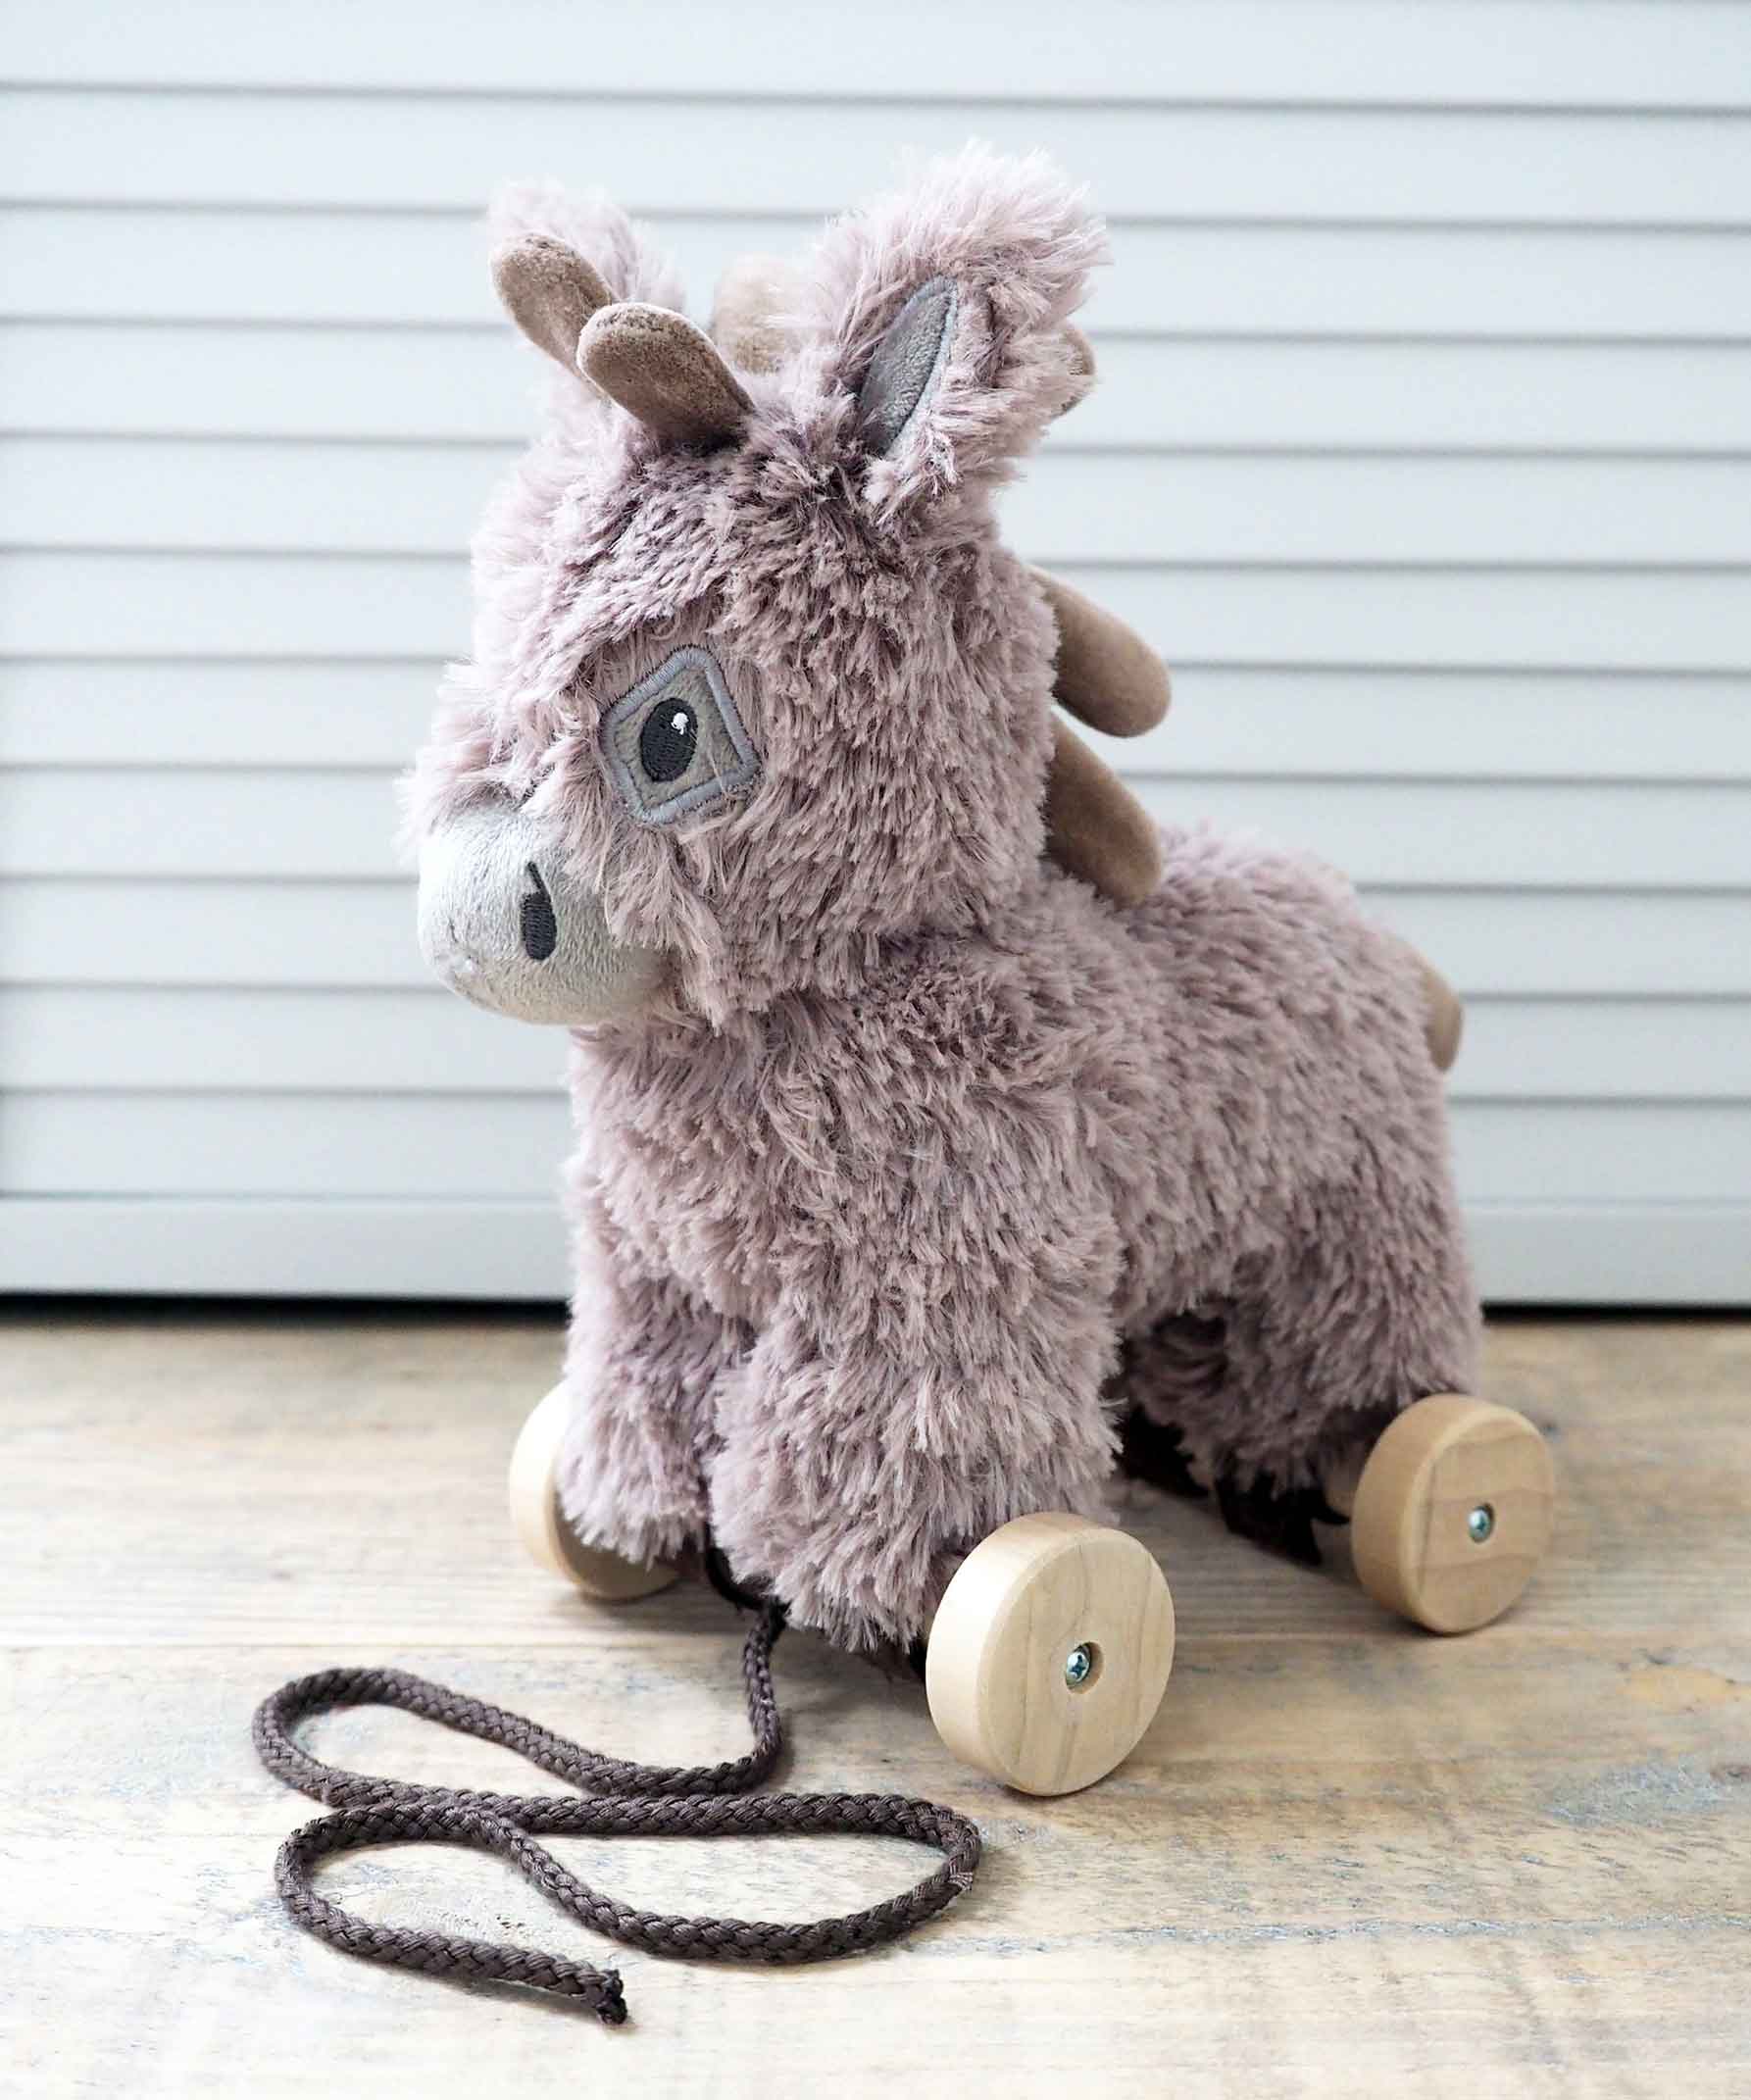 Little Bird Told Me Norbert Donkey Pull Along Toy - For Your Little One